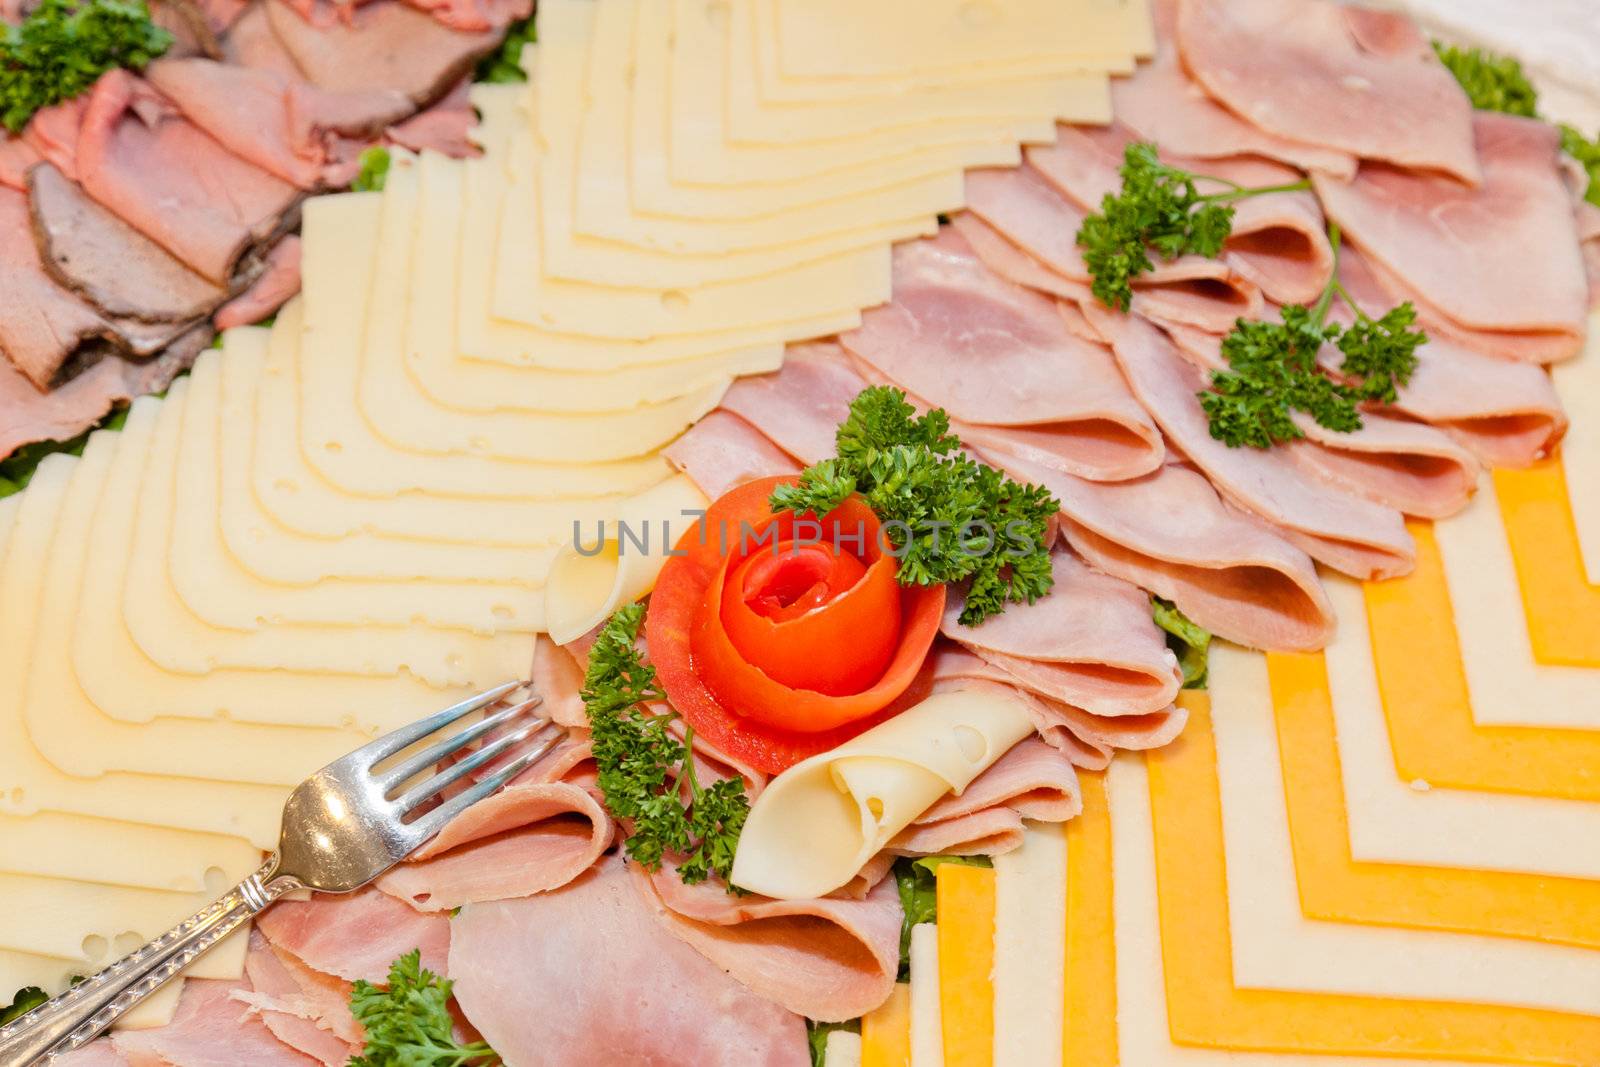 Party tray of assorted meats and cheeses with  flower made of tomato in the middle.